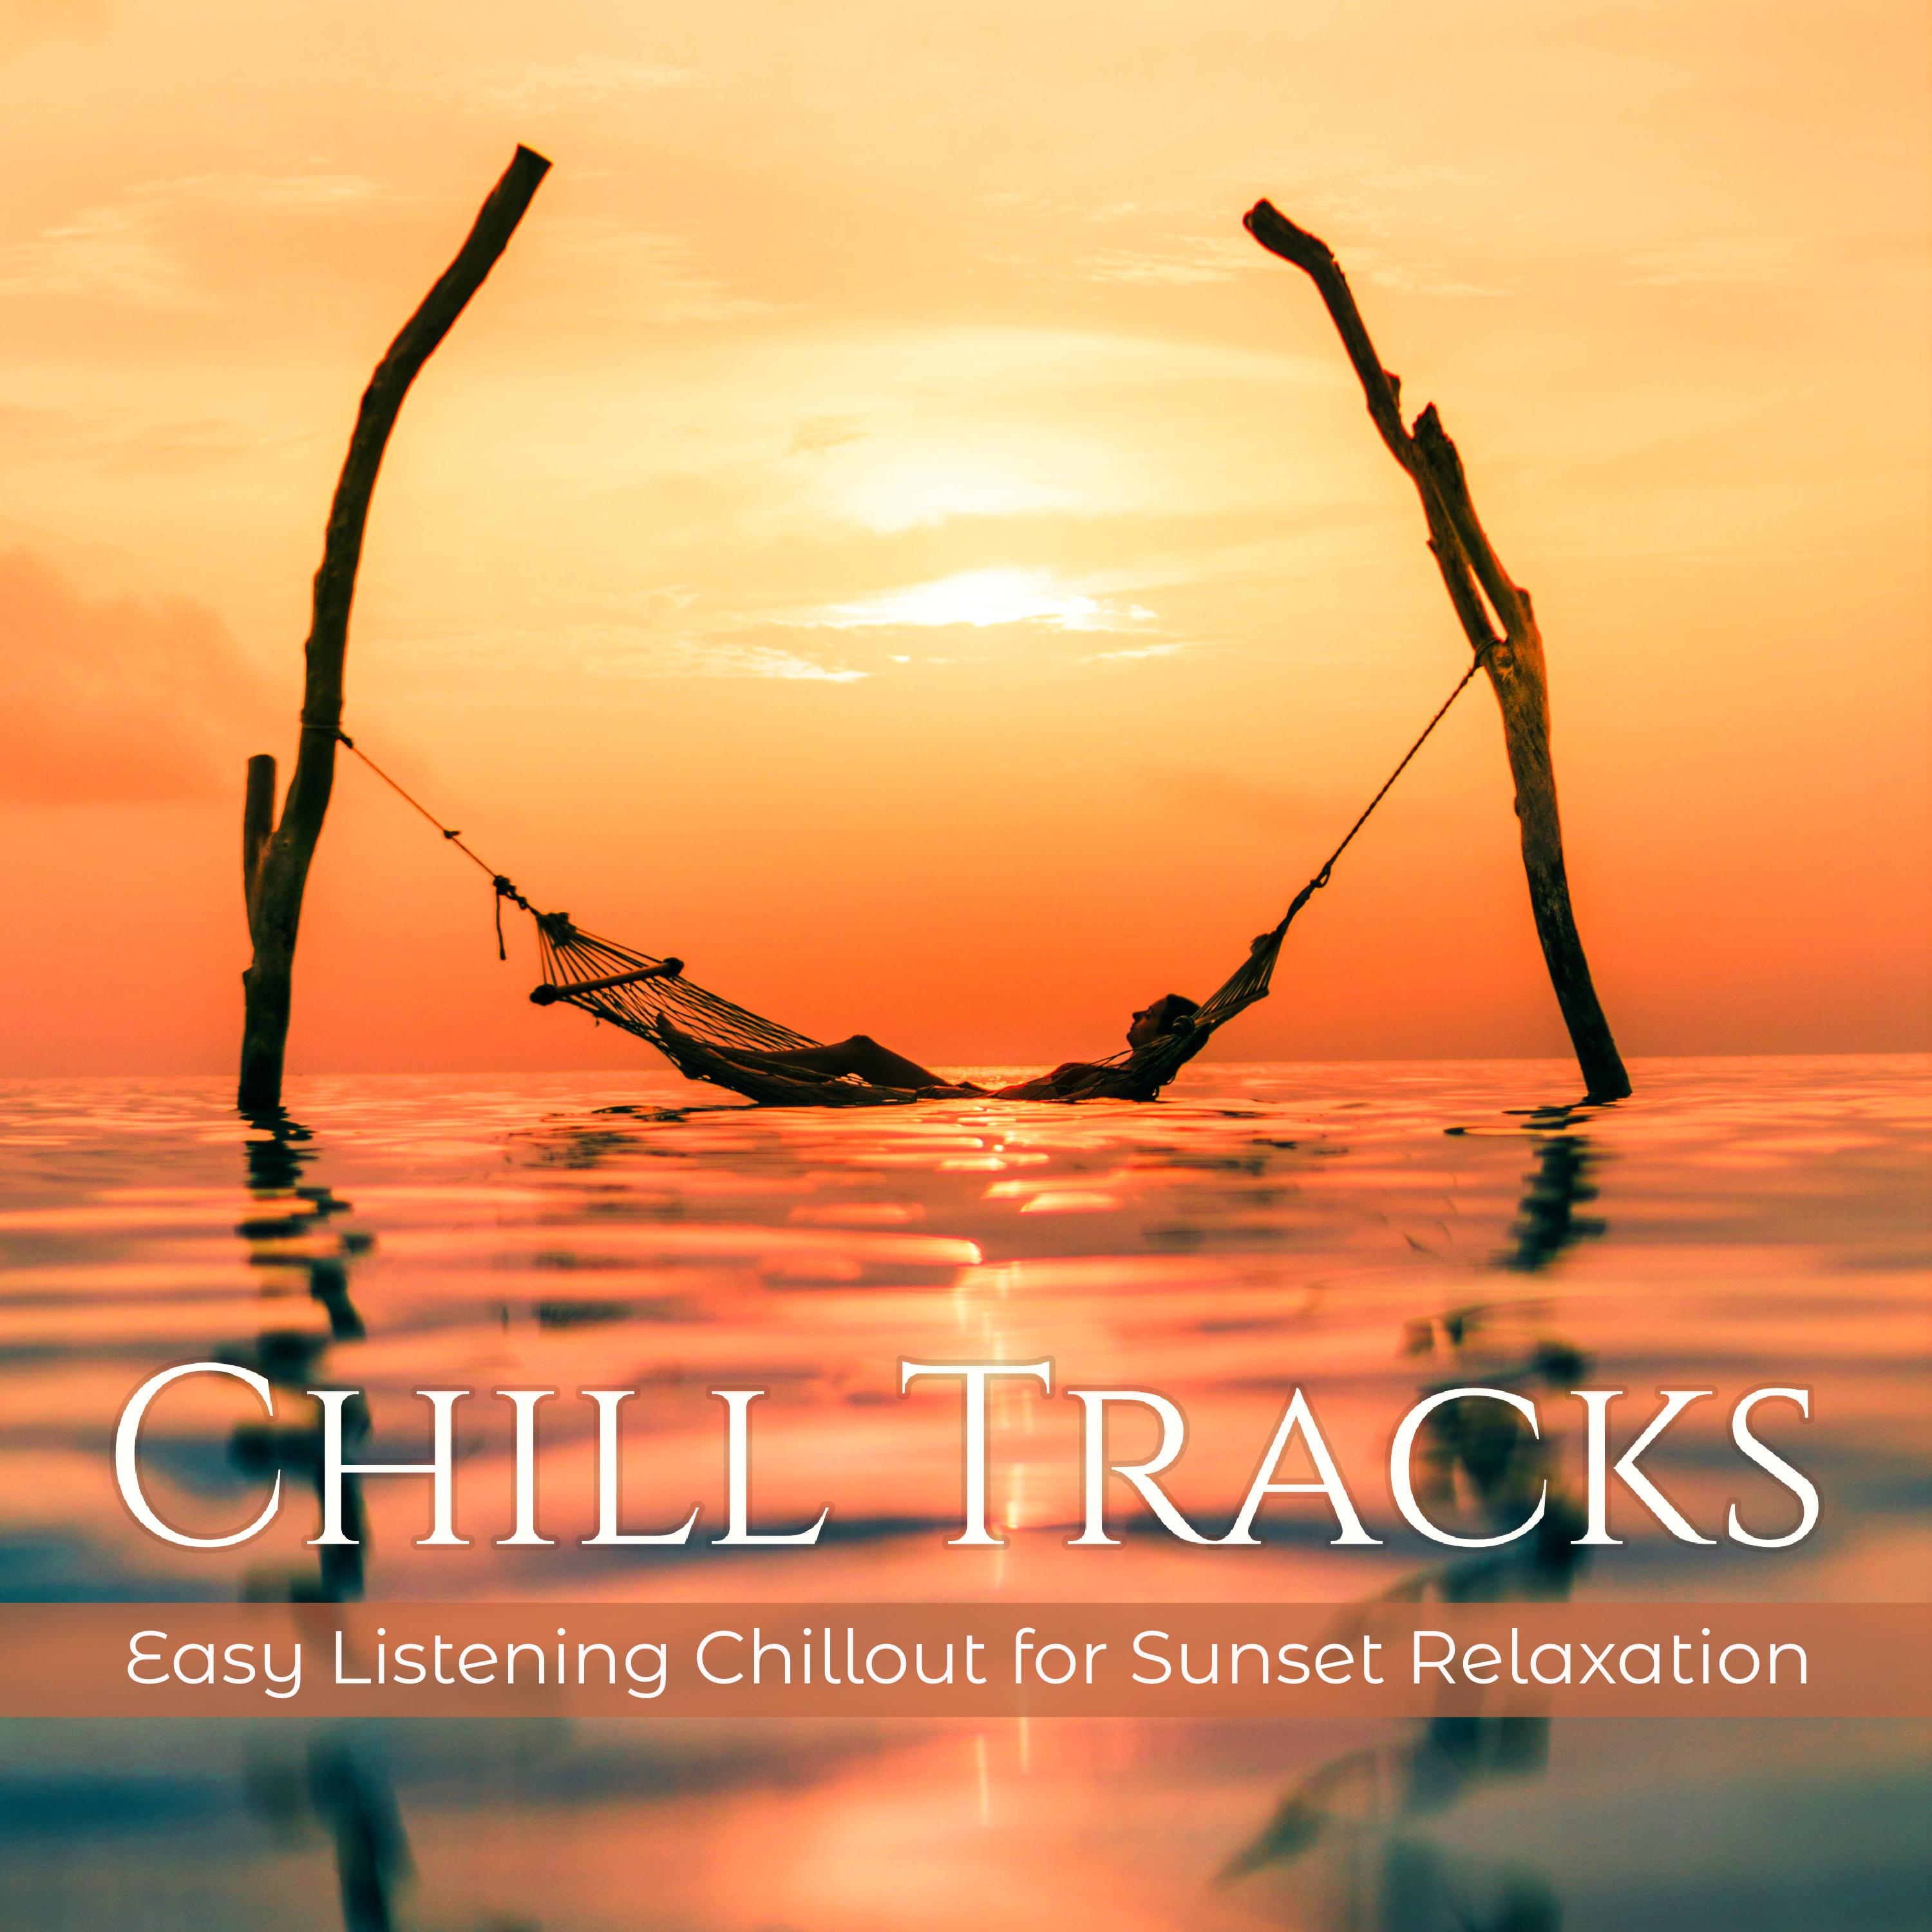 Chill Tracks  Easy Listening Chillout for Sunset Relaxation